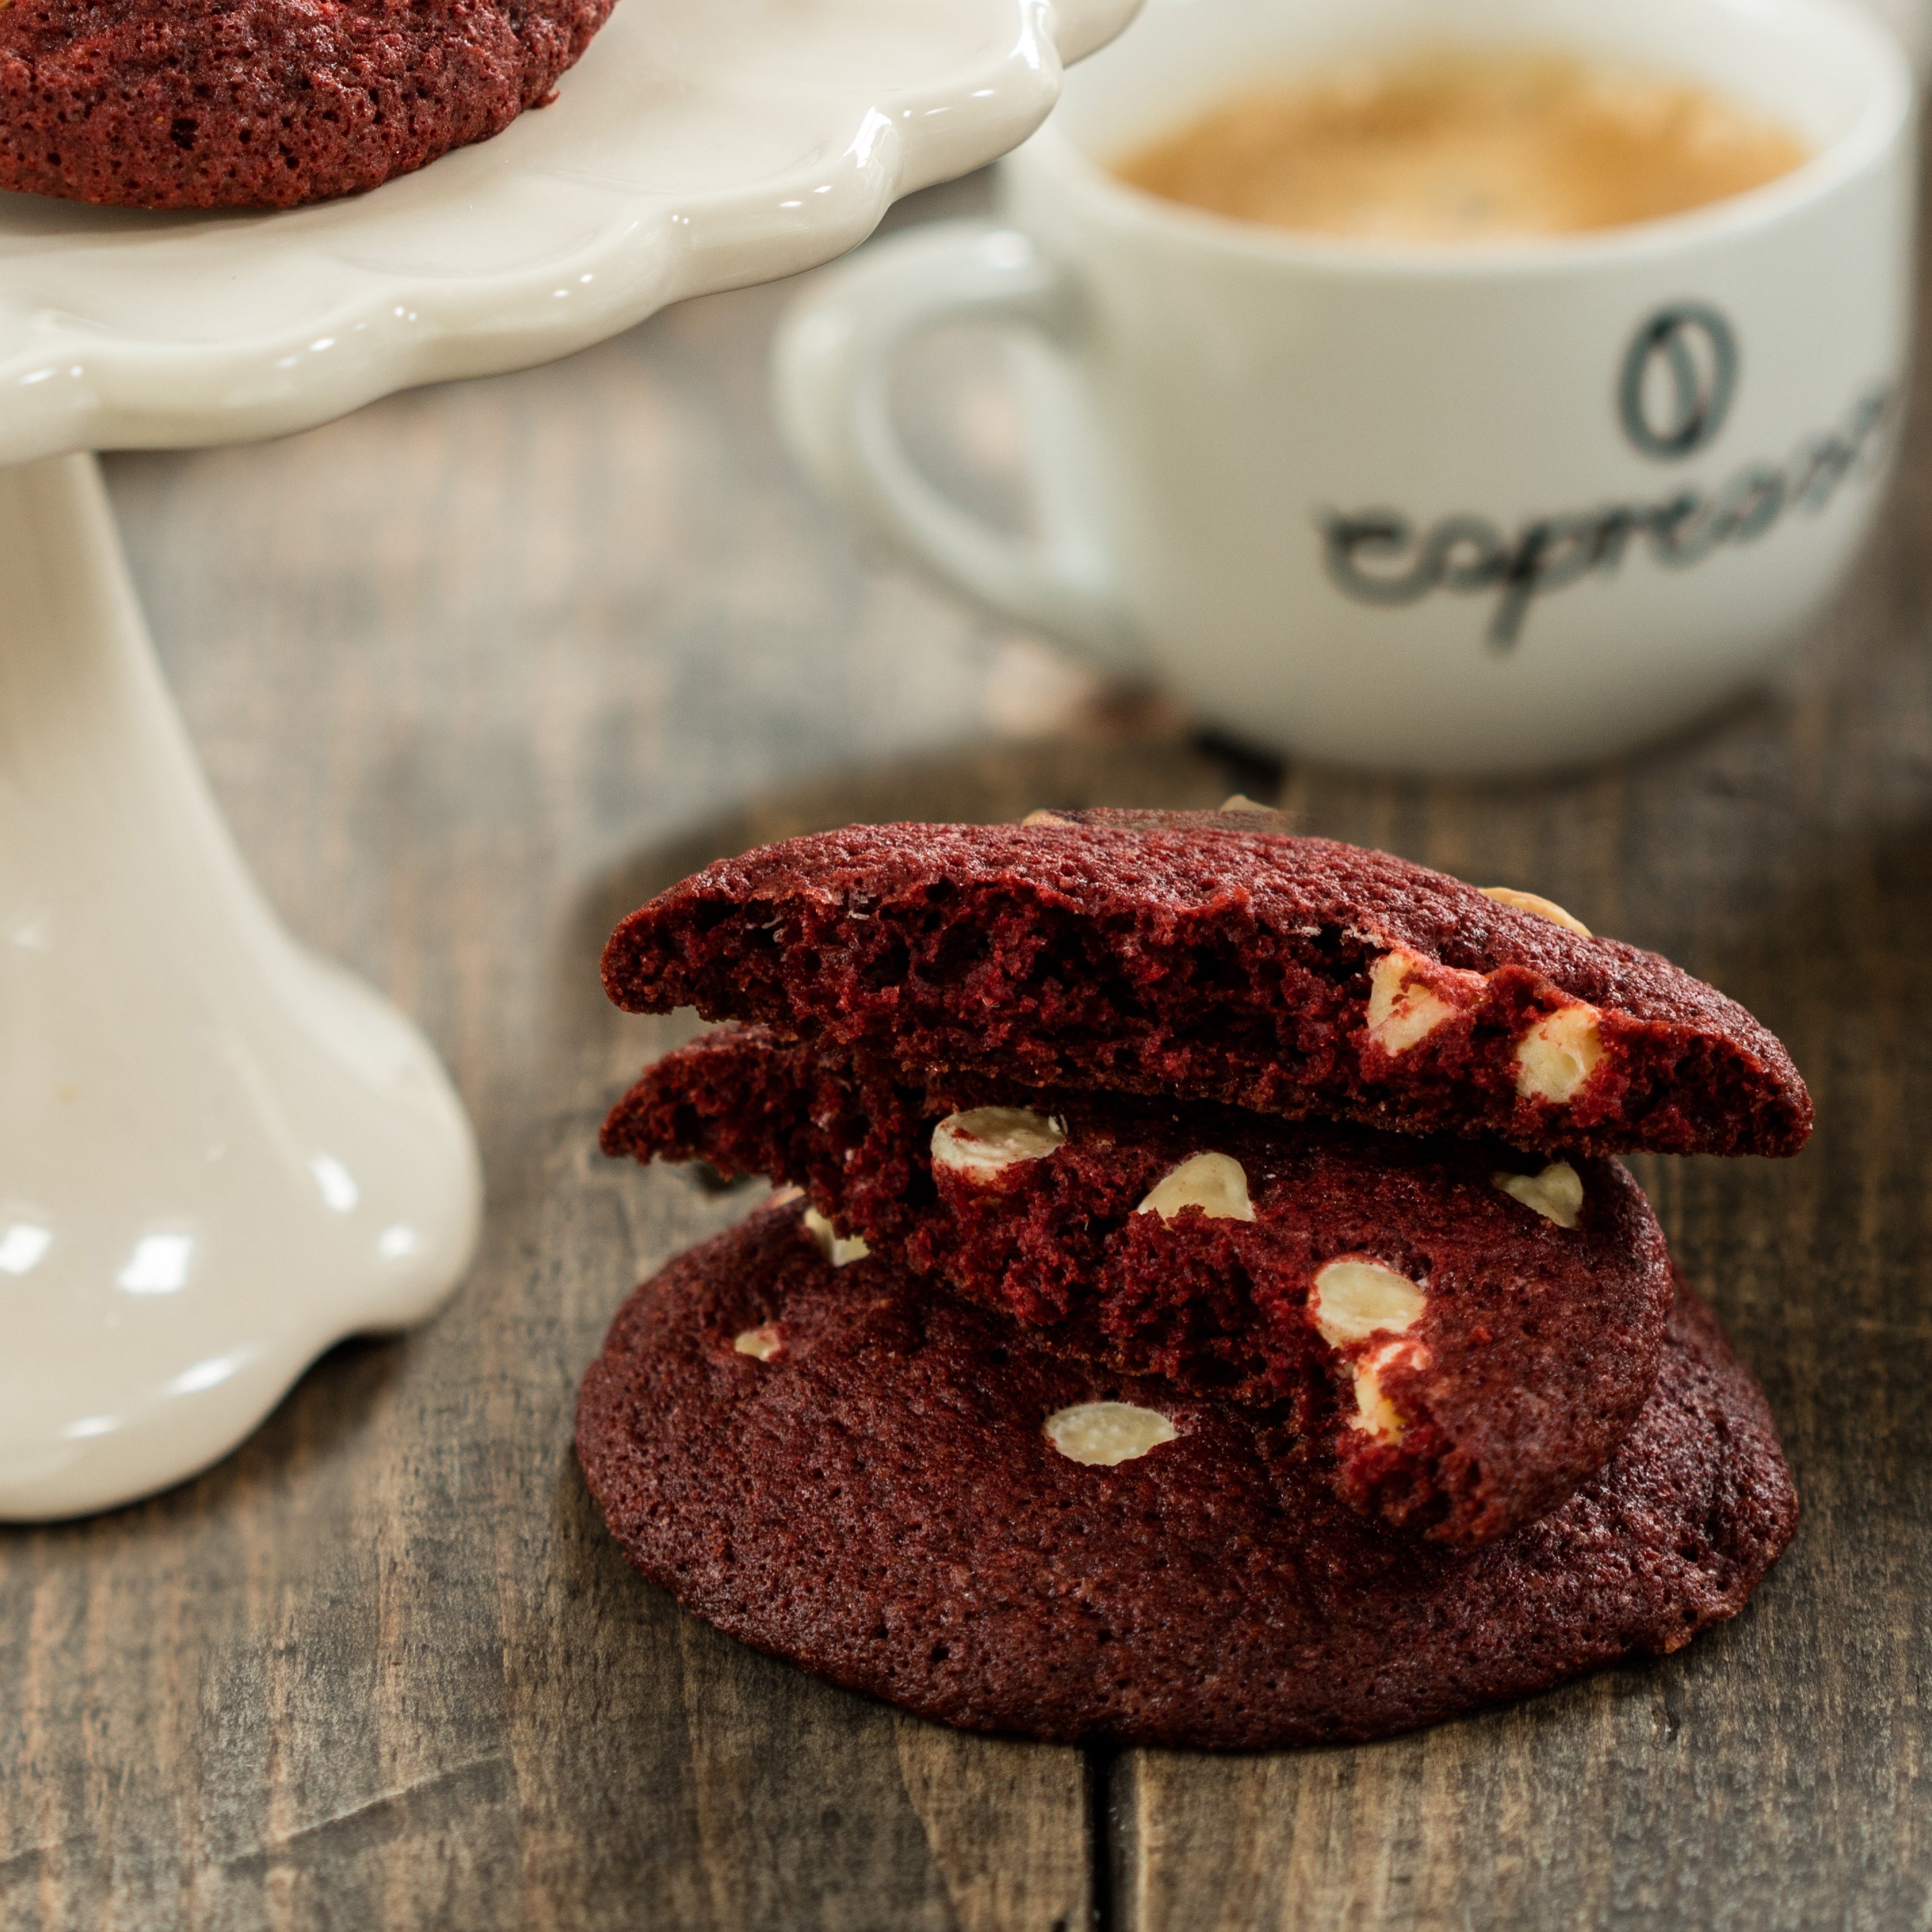 Close-up of a red velvet cookie split in half, showing its dark red centre with white chocolate chips